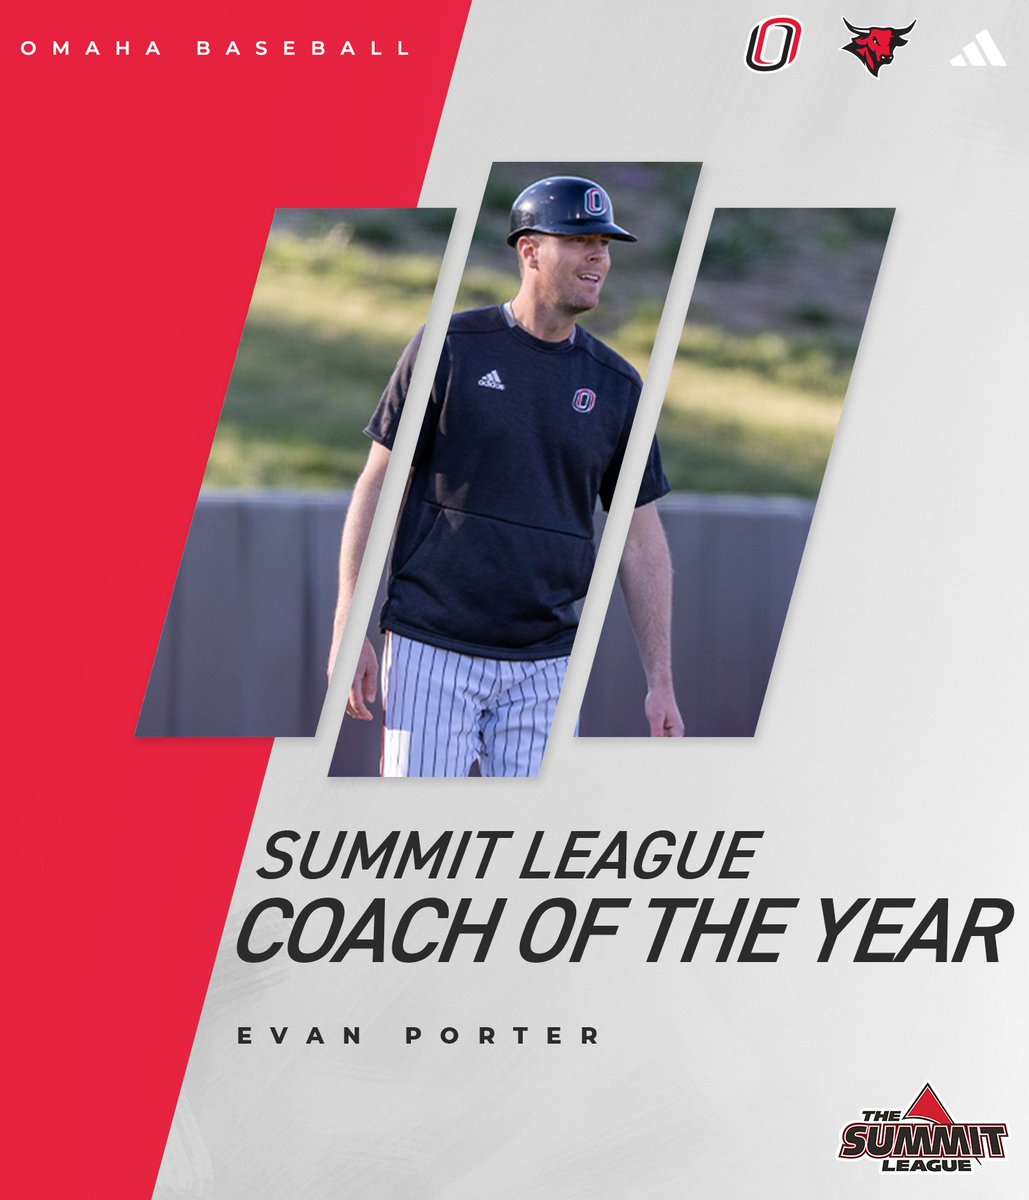 𝑪𝑶𝑨𝑪𝑯 𝑶𝑭 𝑻𝑯𝑬 𝒀𝑬𝑨𝑹 For the 2nd time in his career, Evan Porter has been named Summit League Coach of the Year! After recruiting 20 players in the offseason, he led Omaha to a No. 1 seed and a league-high 12 All-Summit Honorees. 📰bit.ly/4bPJCut #OmahaBSB